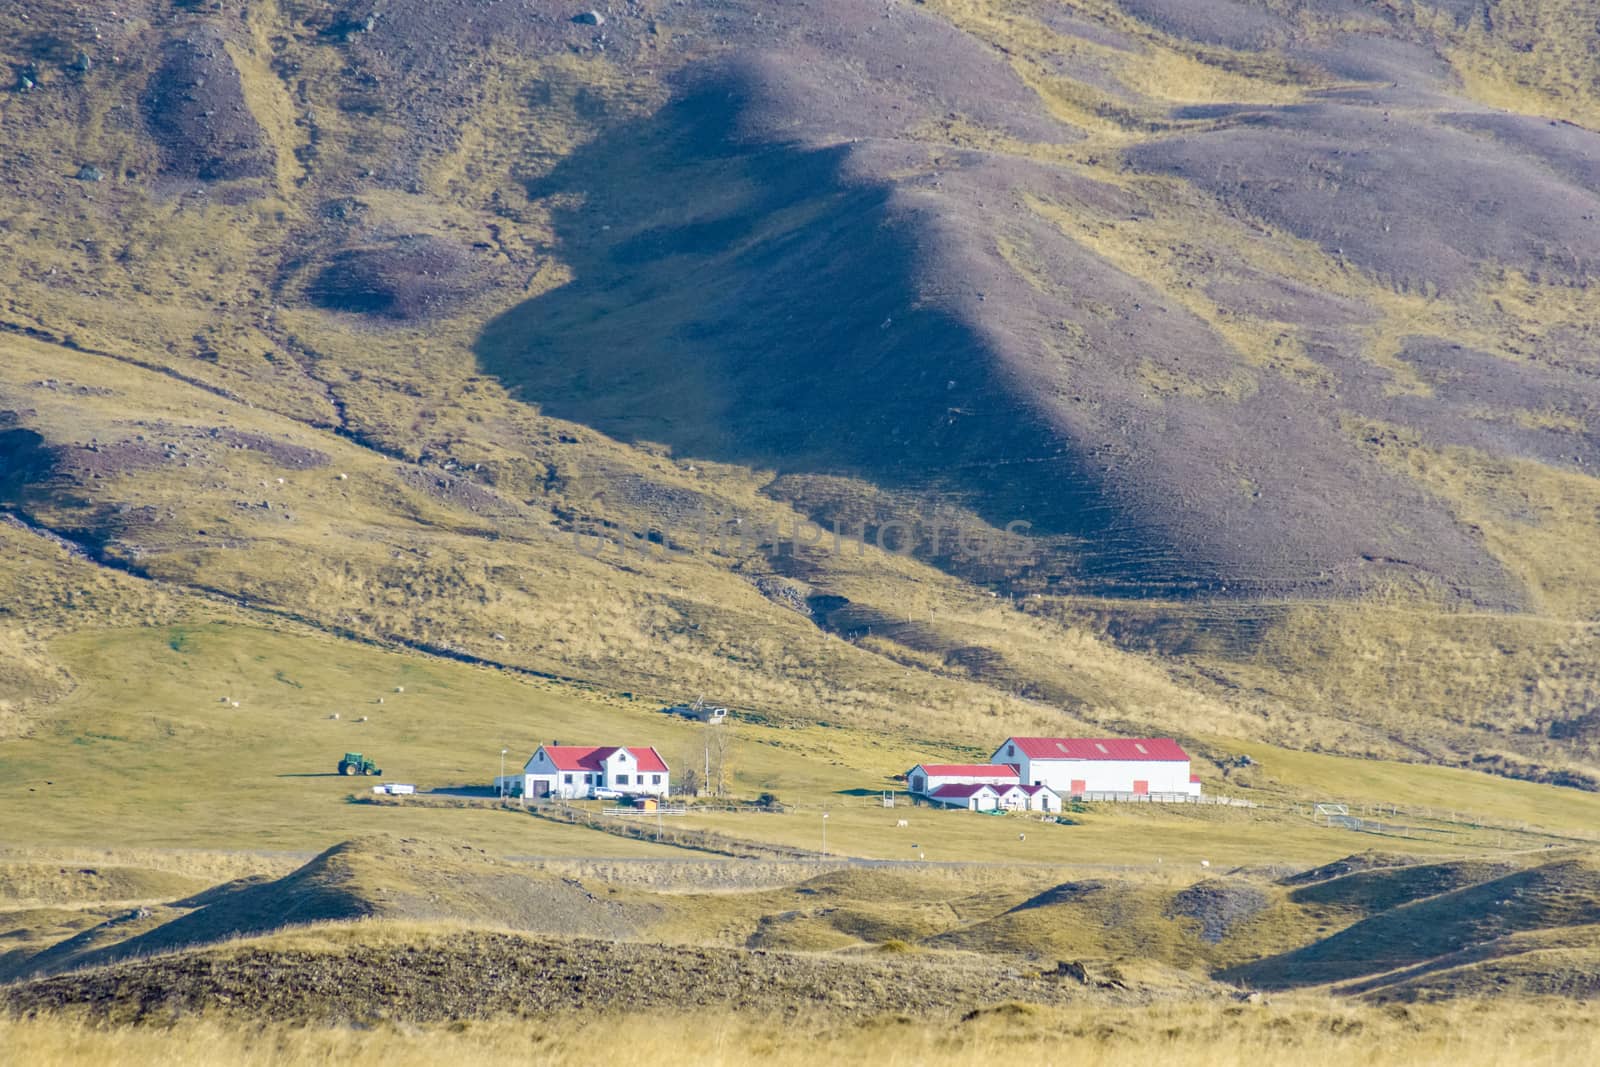 Northern Iceland farm based at the foot of a mountain slope during sunshine weather